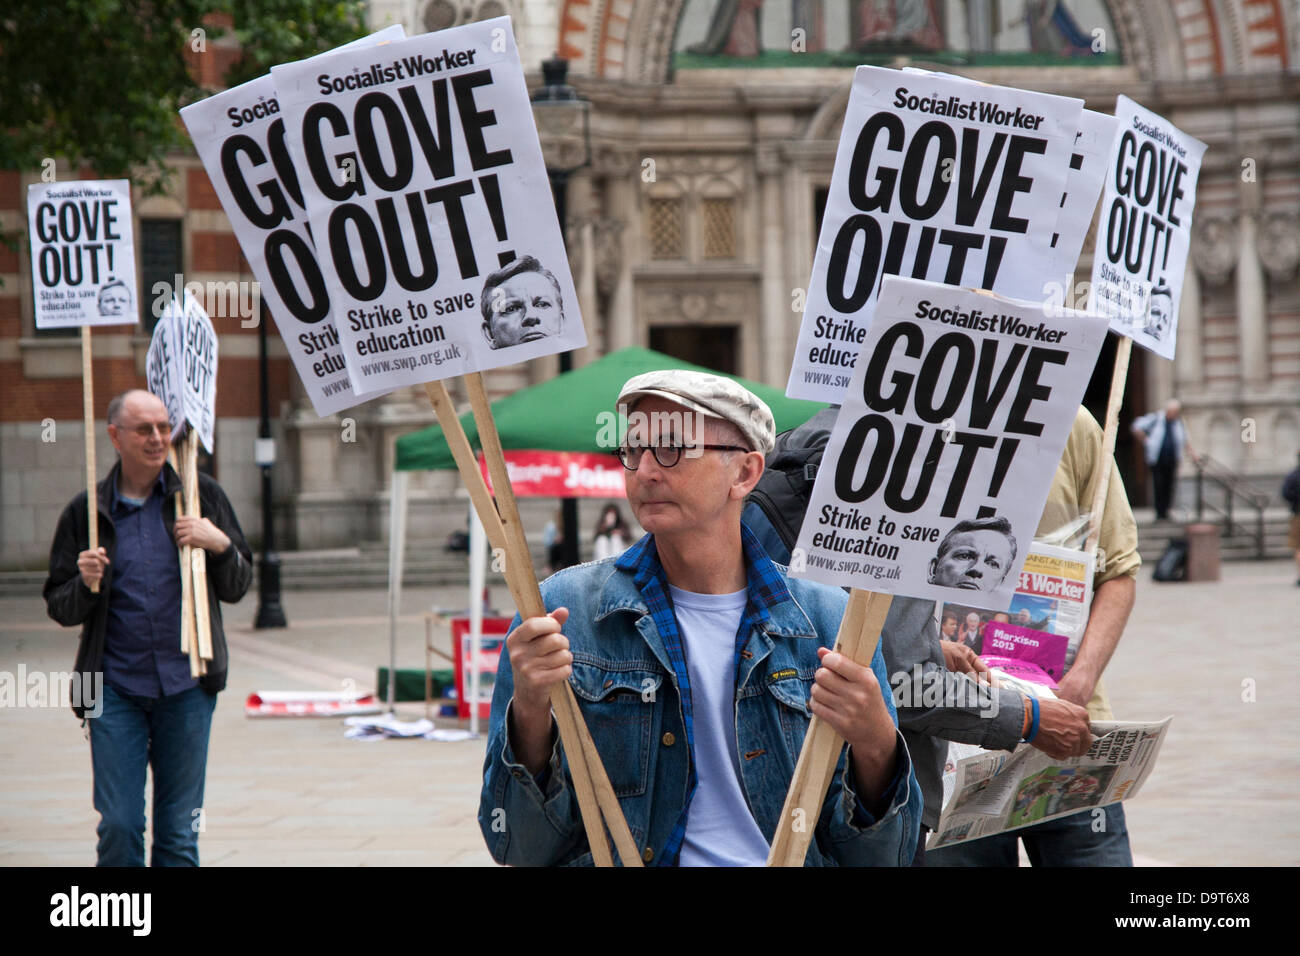 25 June 2013, London. Placards demand Gove's exit as teachers march in London against Education Secretary Michael Gove and his proposed reforms. Stock Photo